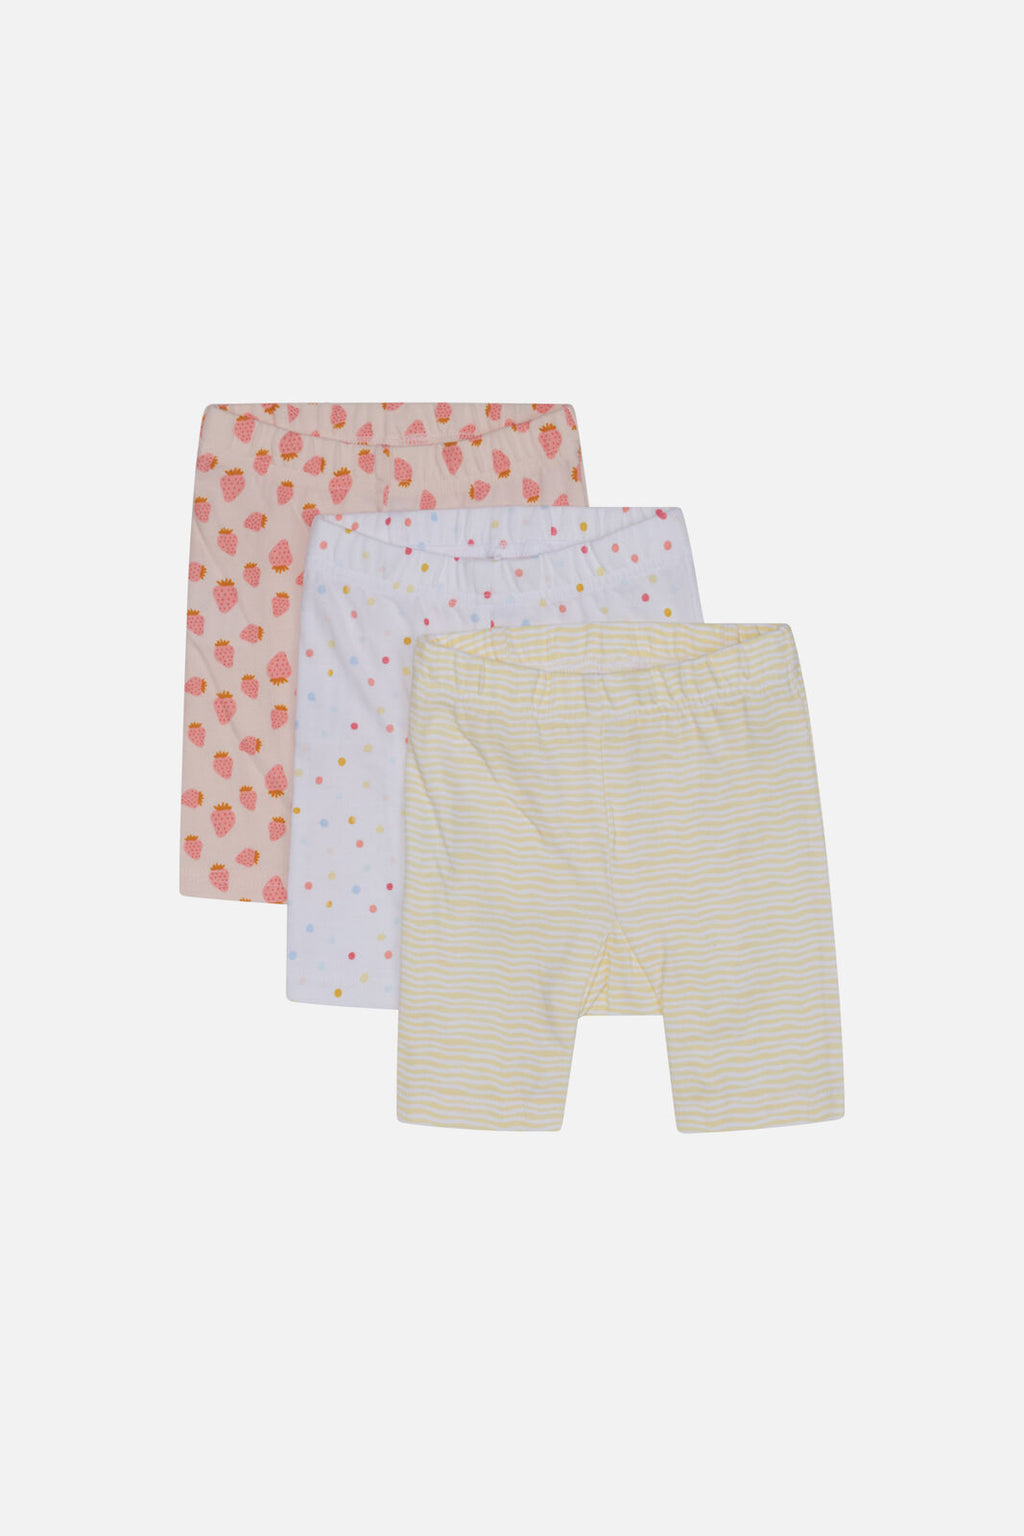 Hust and Claire Labika Shorts 3pk